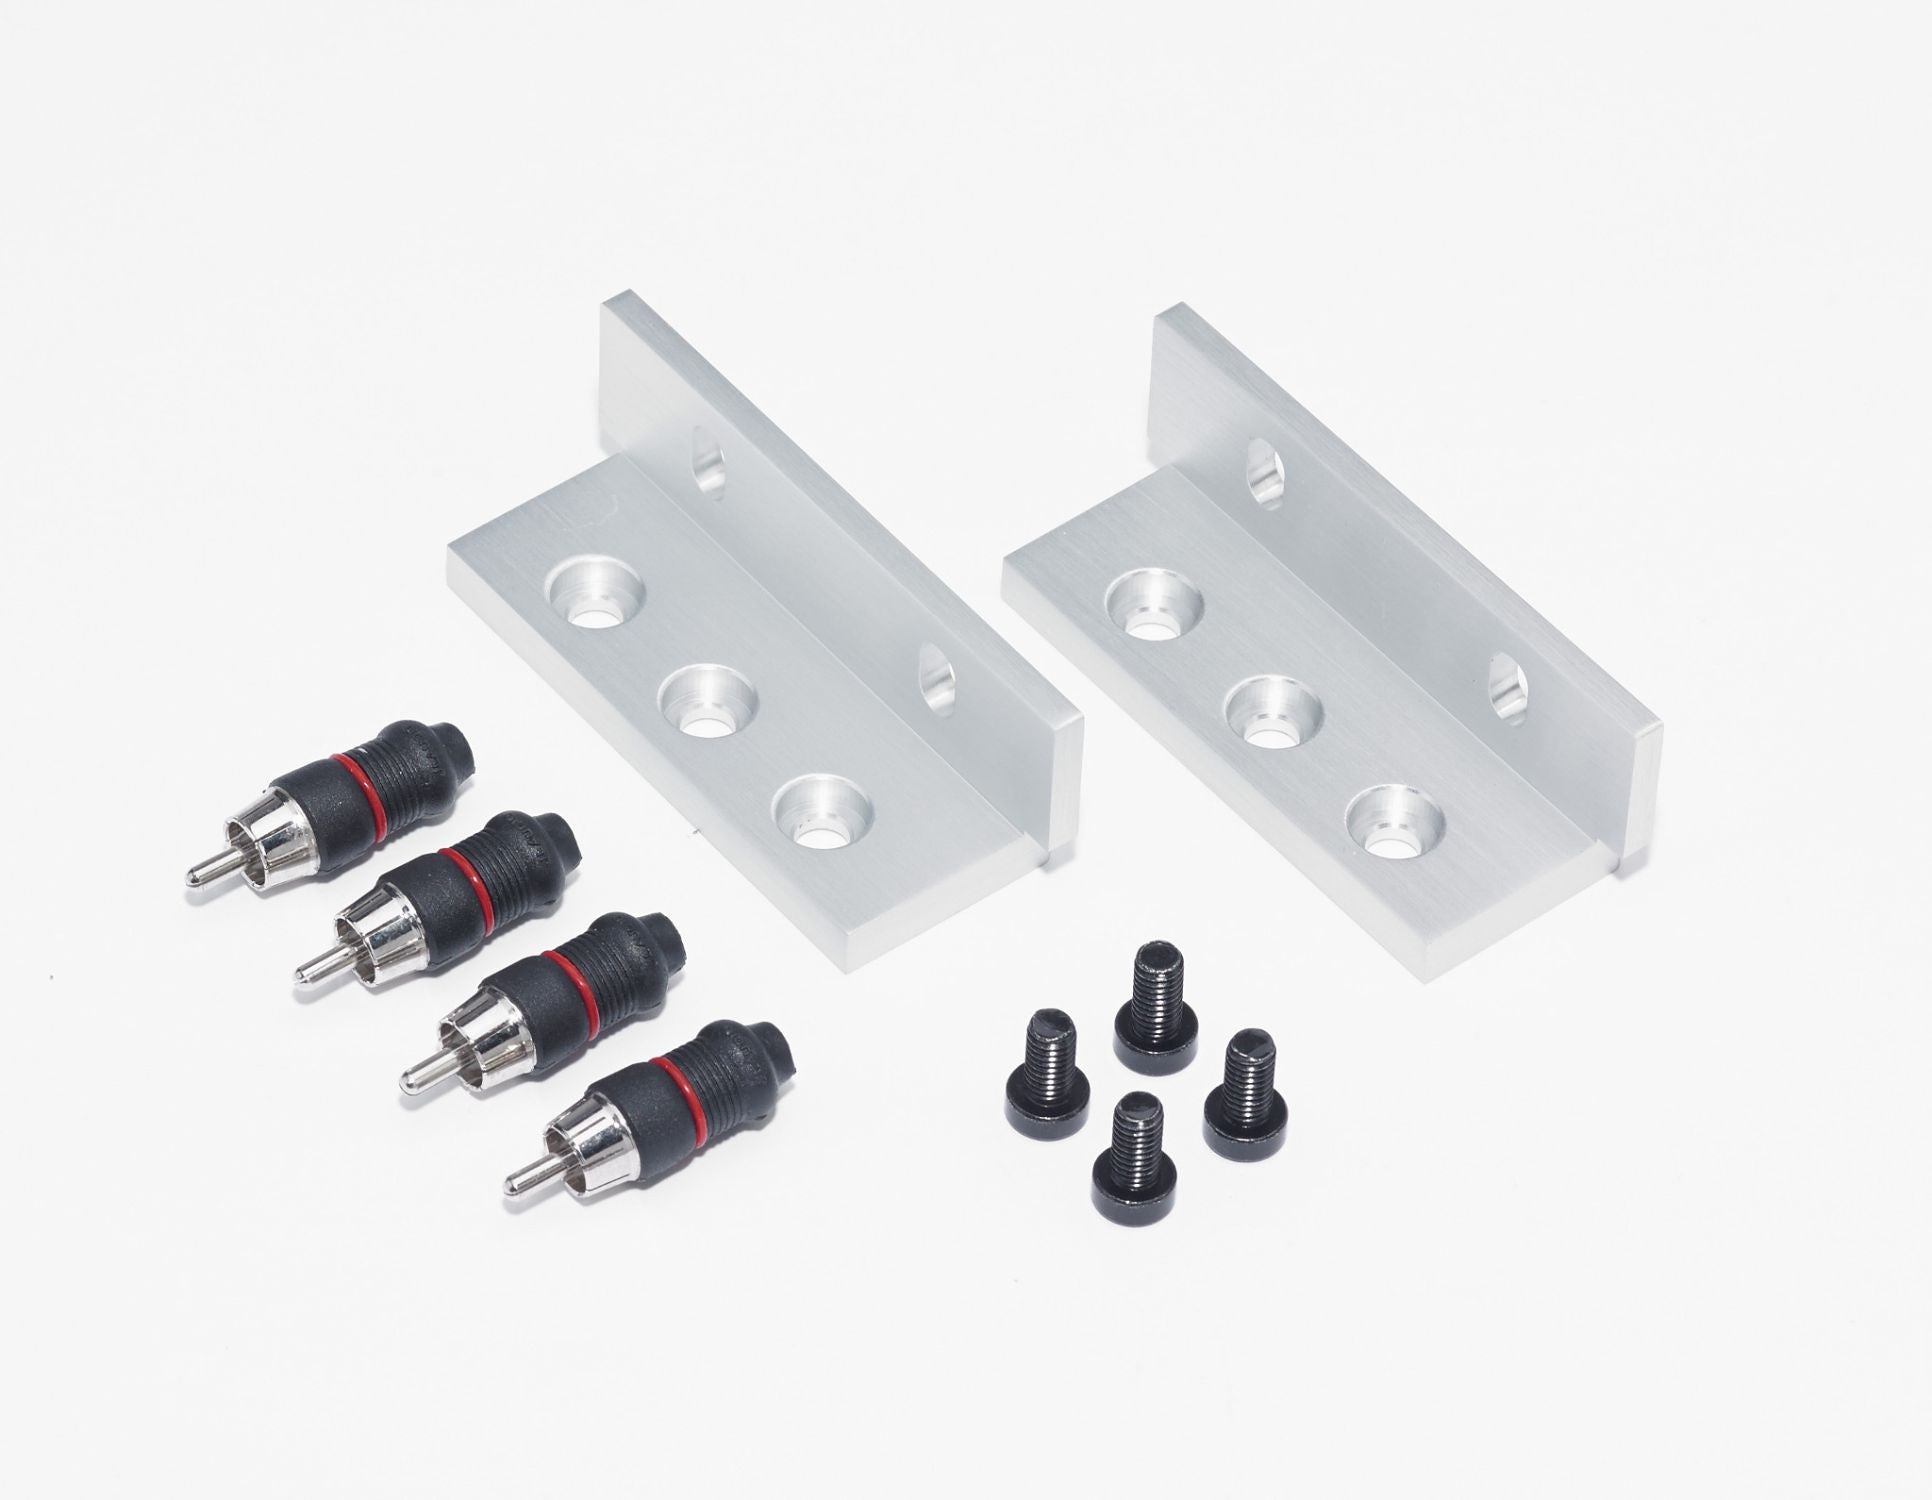 Accessories included with CR-1 are Rack-Mounting Tabs, Hardware and Shorting Plugs